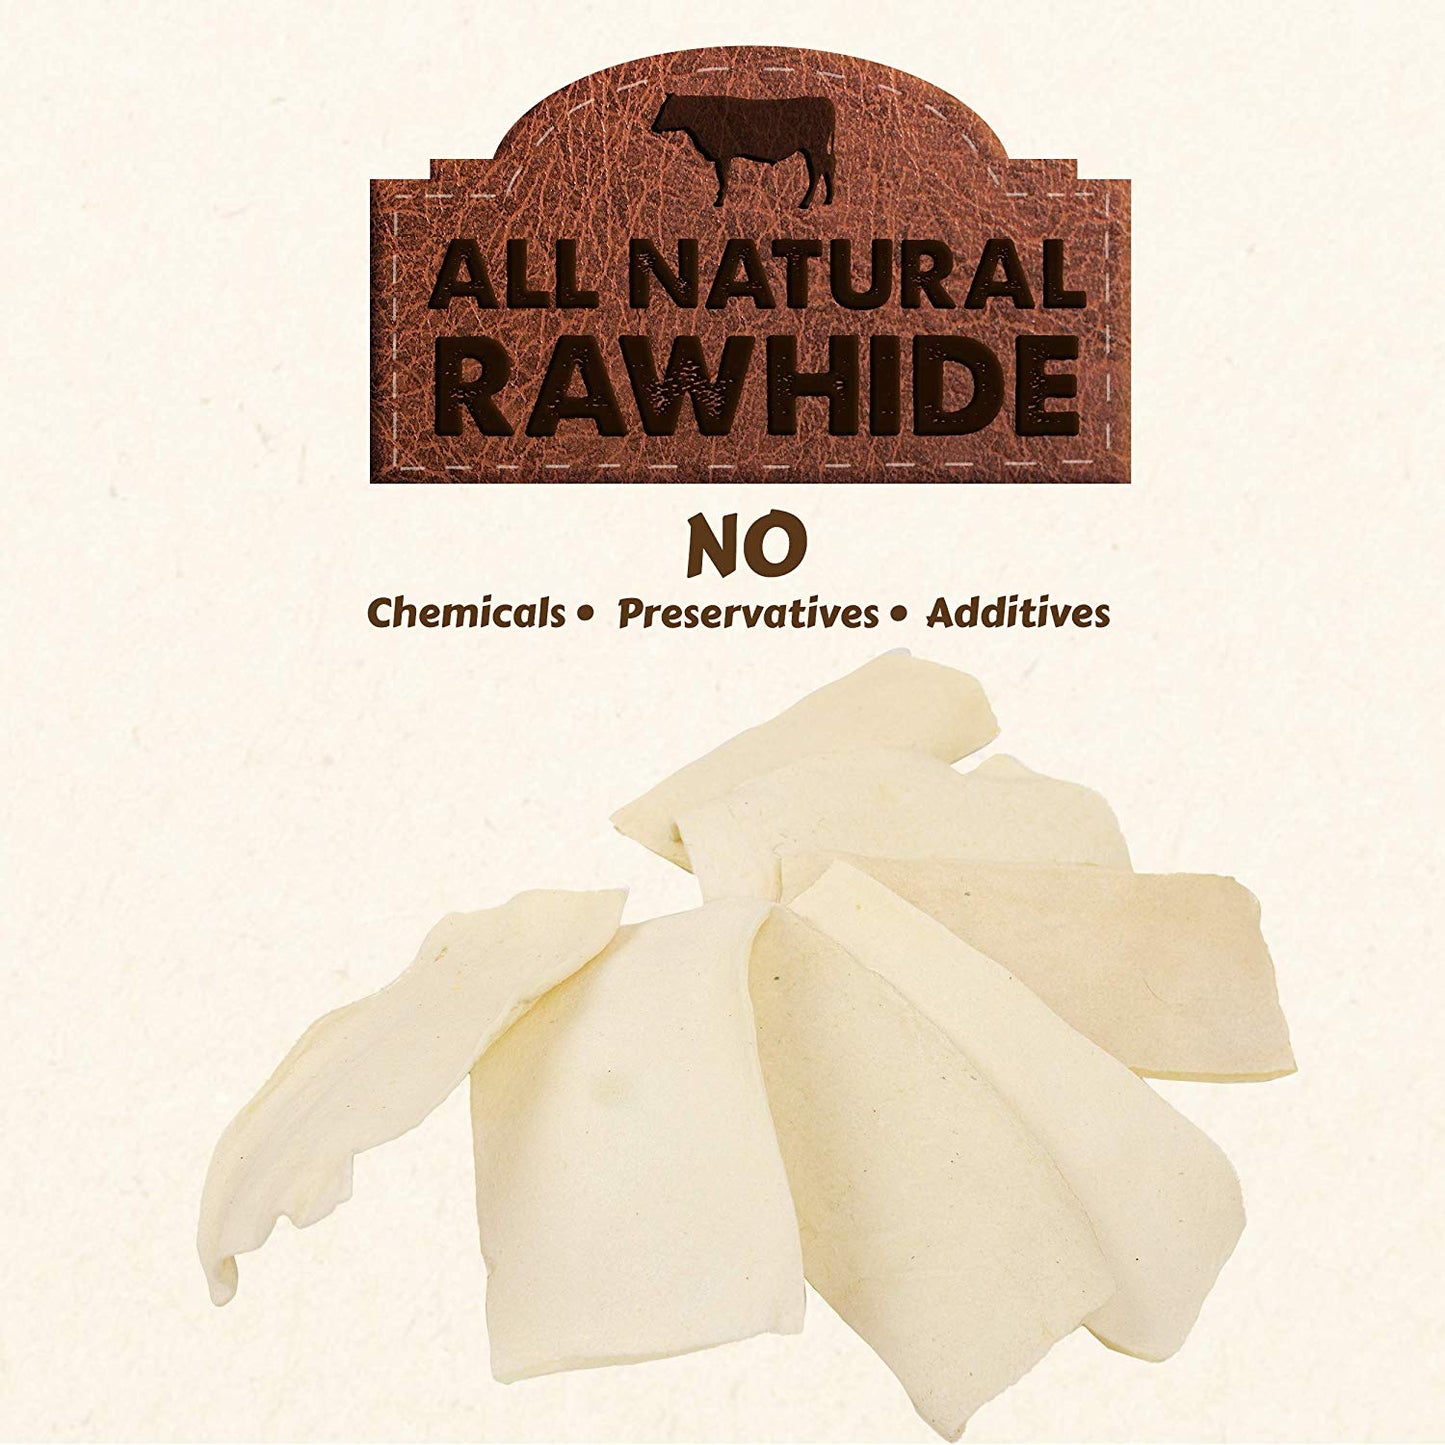 All Natural Rawhide Chips - Dog Chew Treats - By Weight